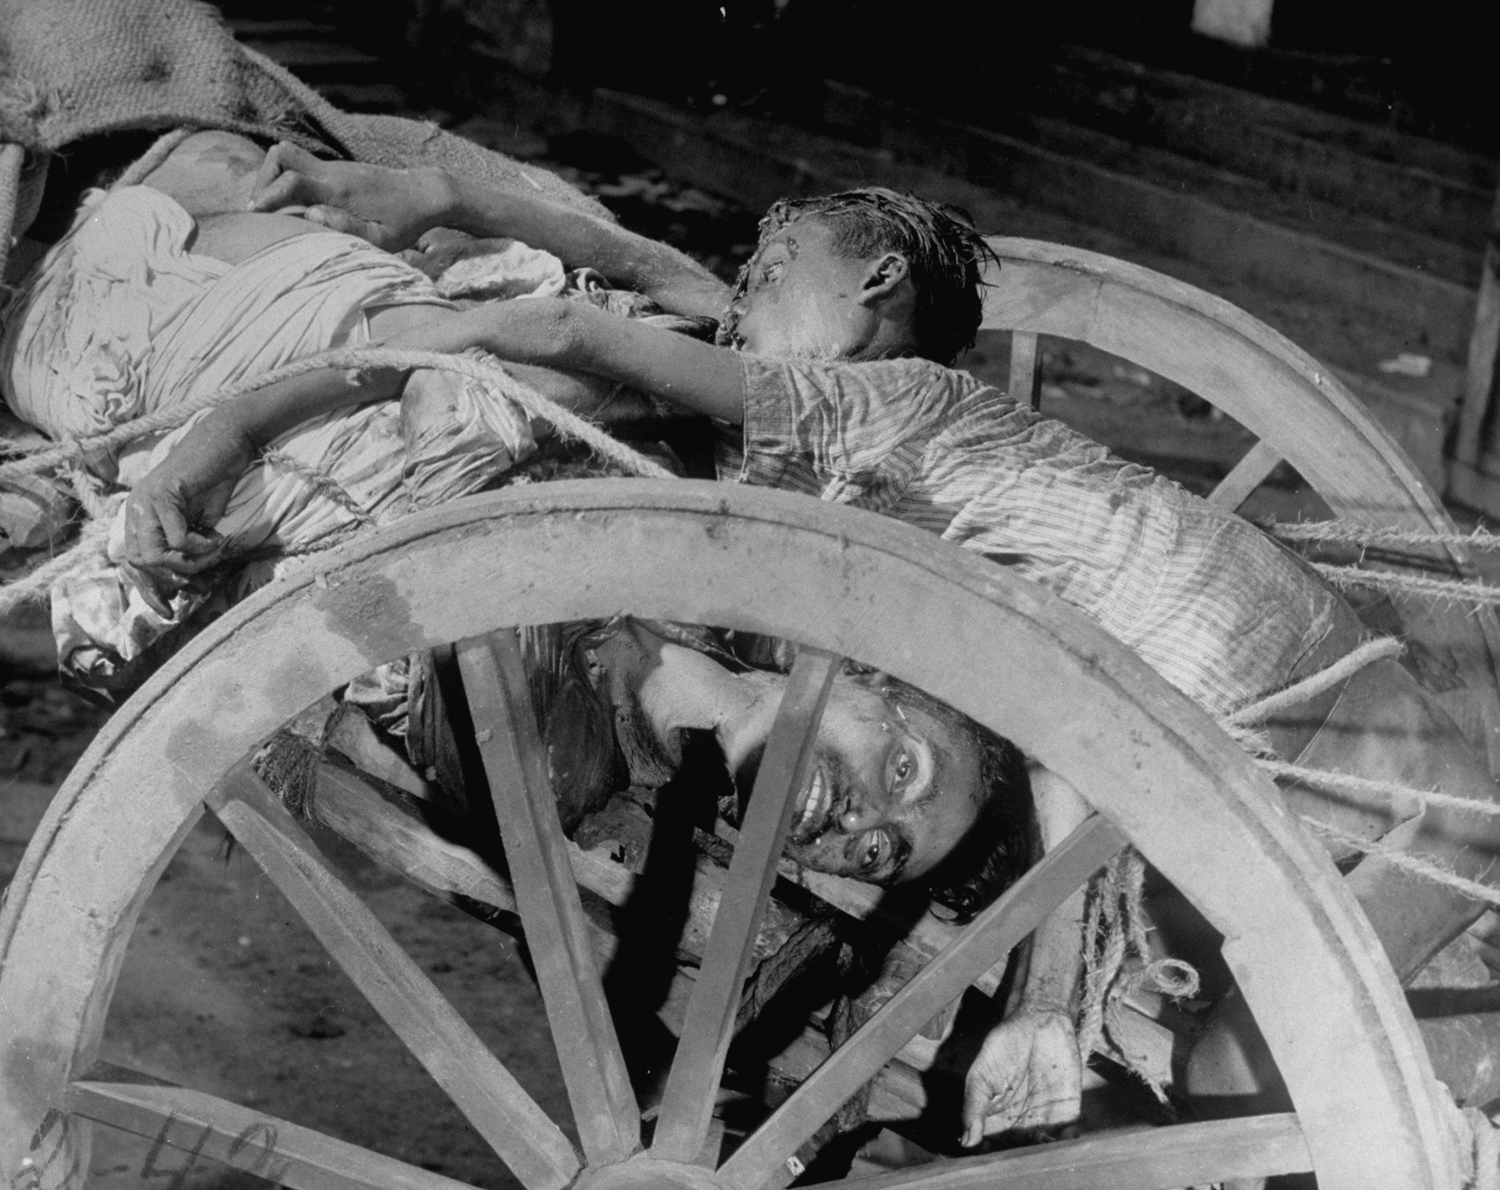 Corpses in a cart prior to being cremated after bloody rioting between Hindus and Muslims, Calcutta (now Kolkata), India, 1946.